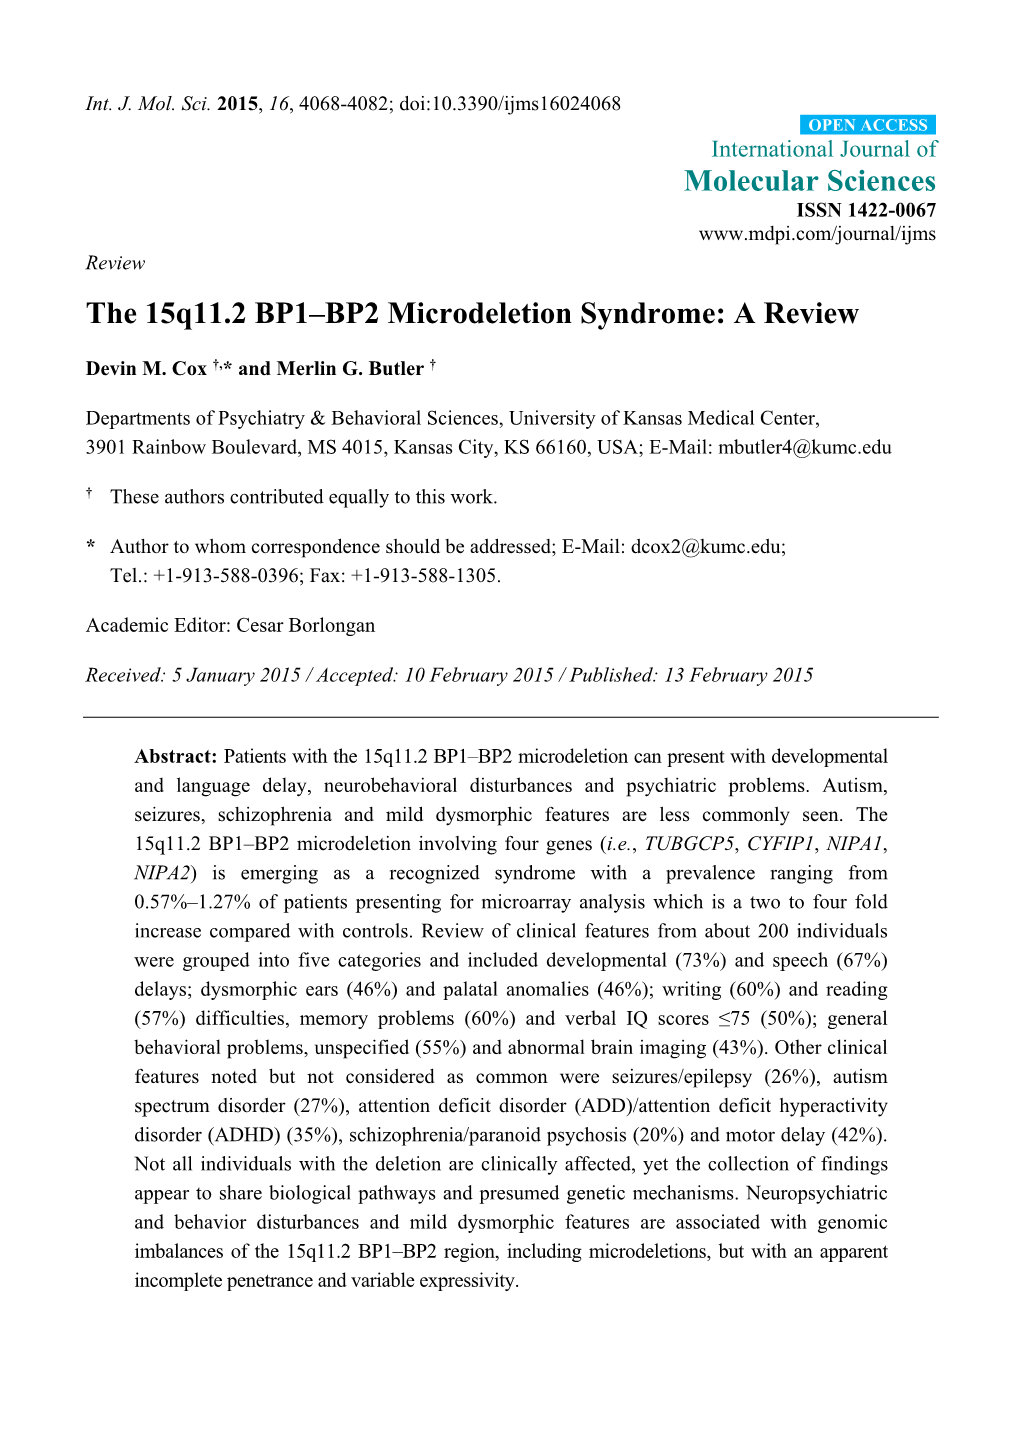 The 15Q11.2 BP1–BP2 Microdeletion Syndrome: a Review